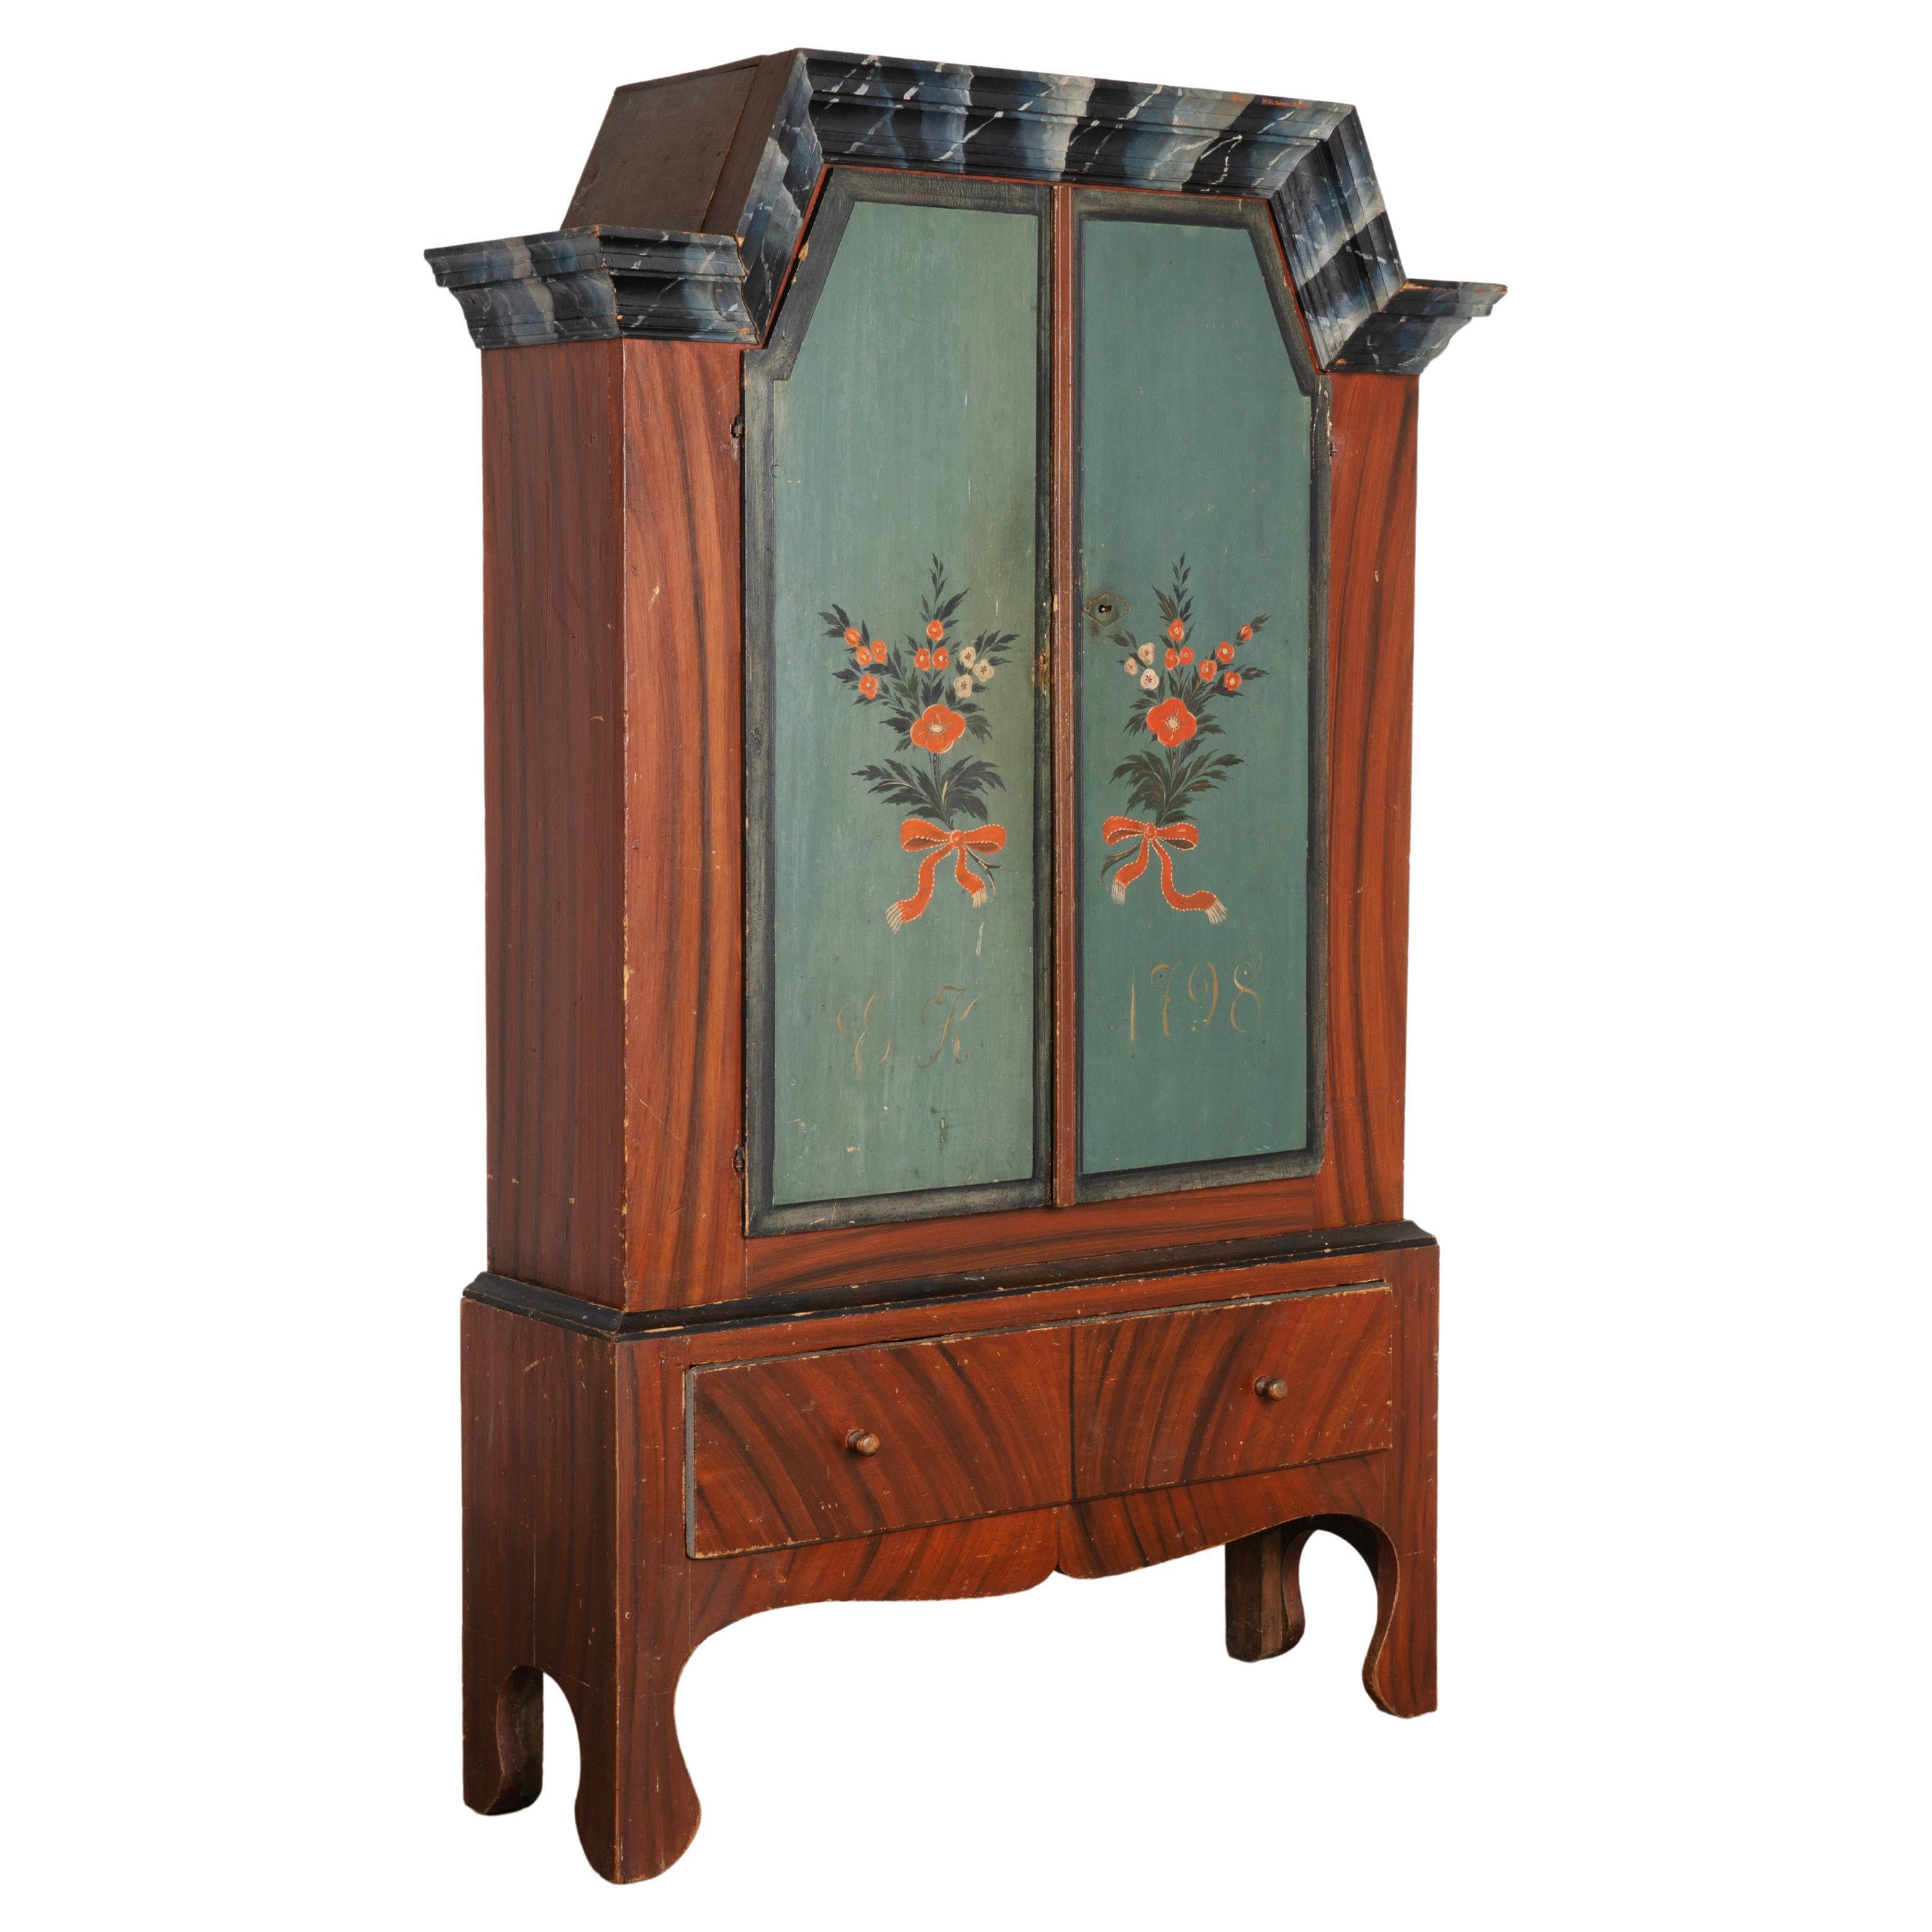 Original Hand Painted Swedish Cabinet dated 1798 For Sale